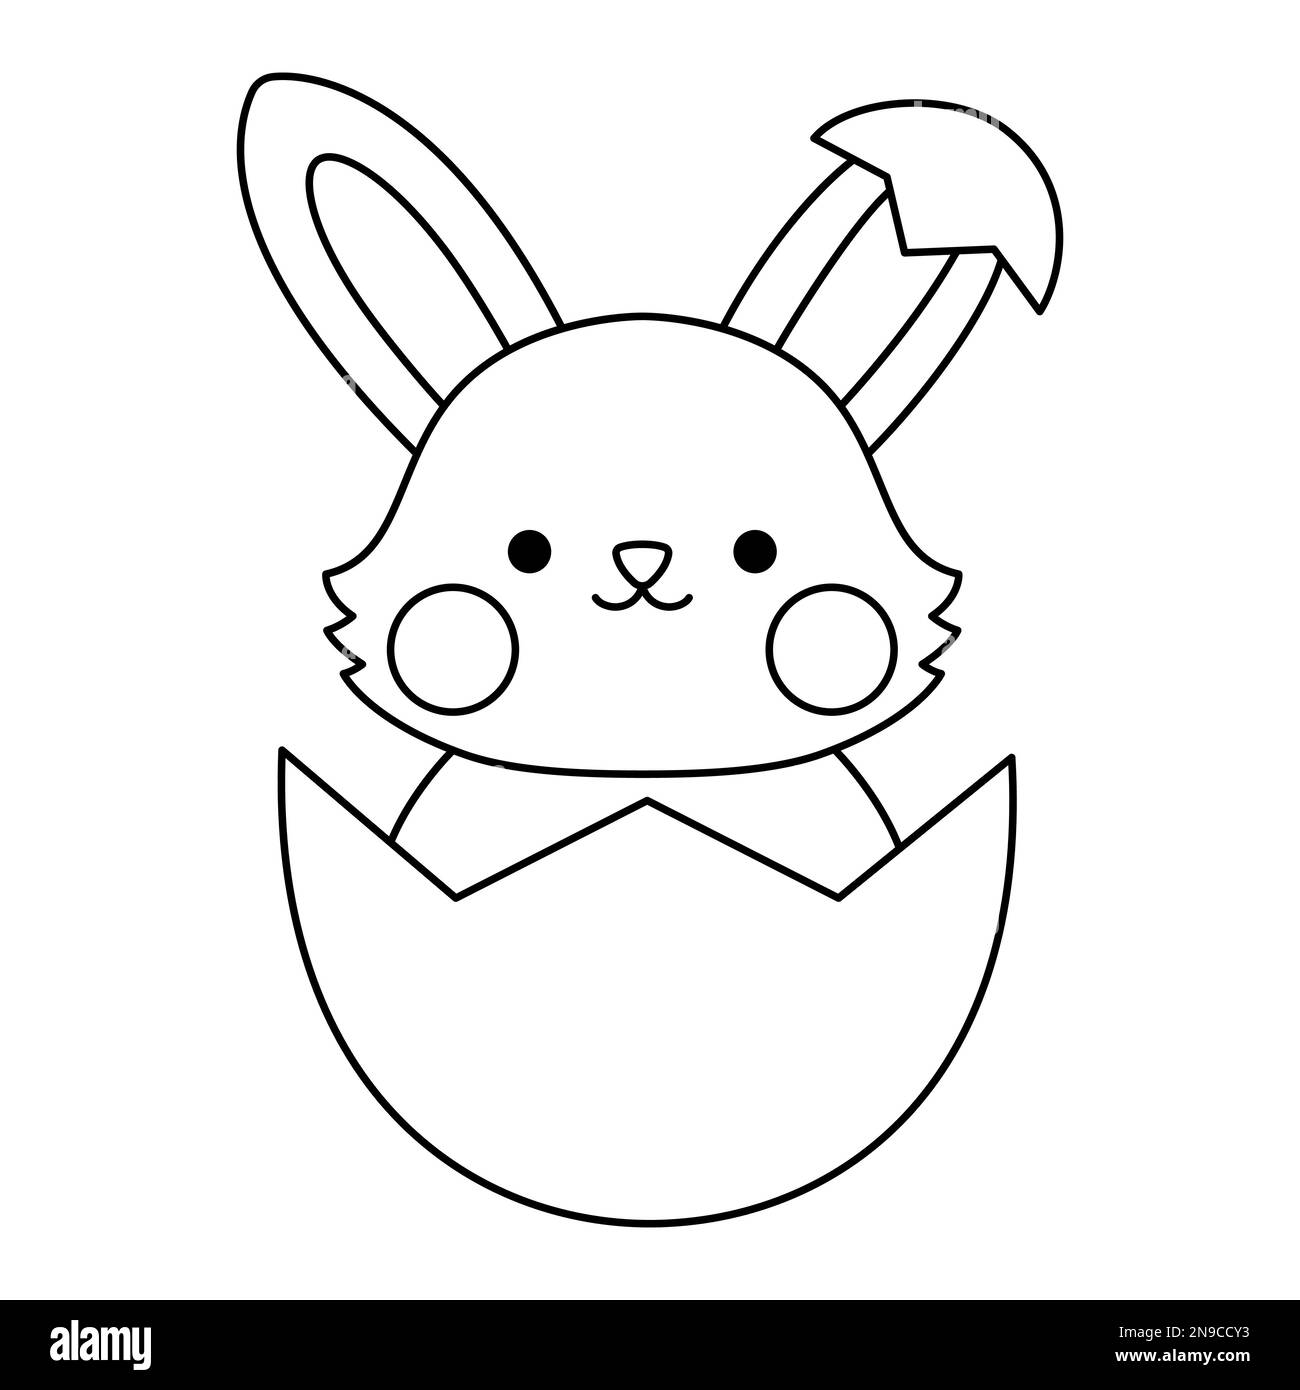 Vector black and white Easter bunny icon for kids. Cute kawaii line rabbit illustration or coloring page. Funny cartoon hare character. Traditional sp Stock Vector